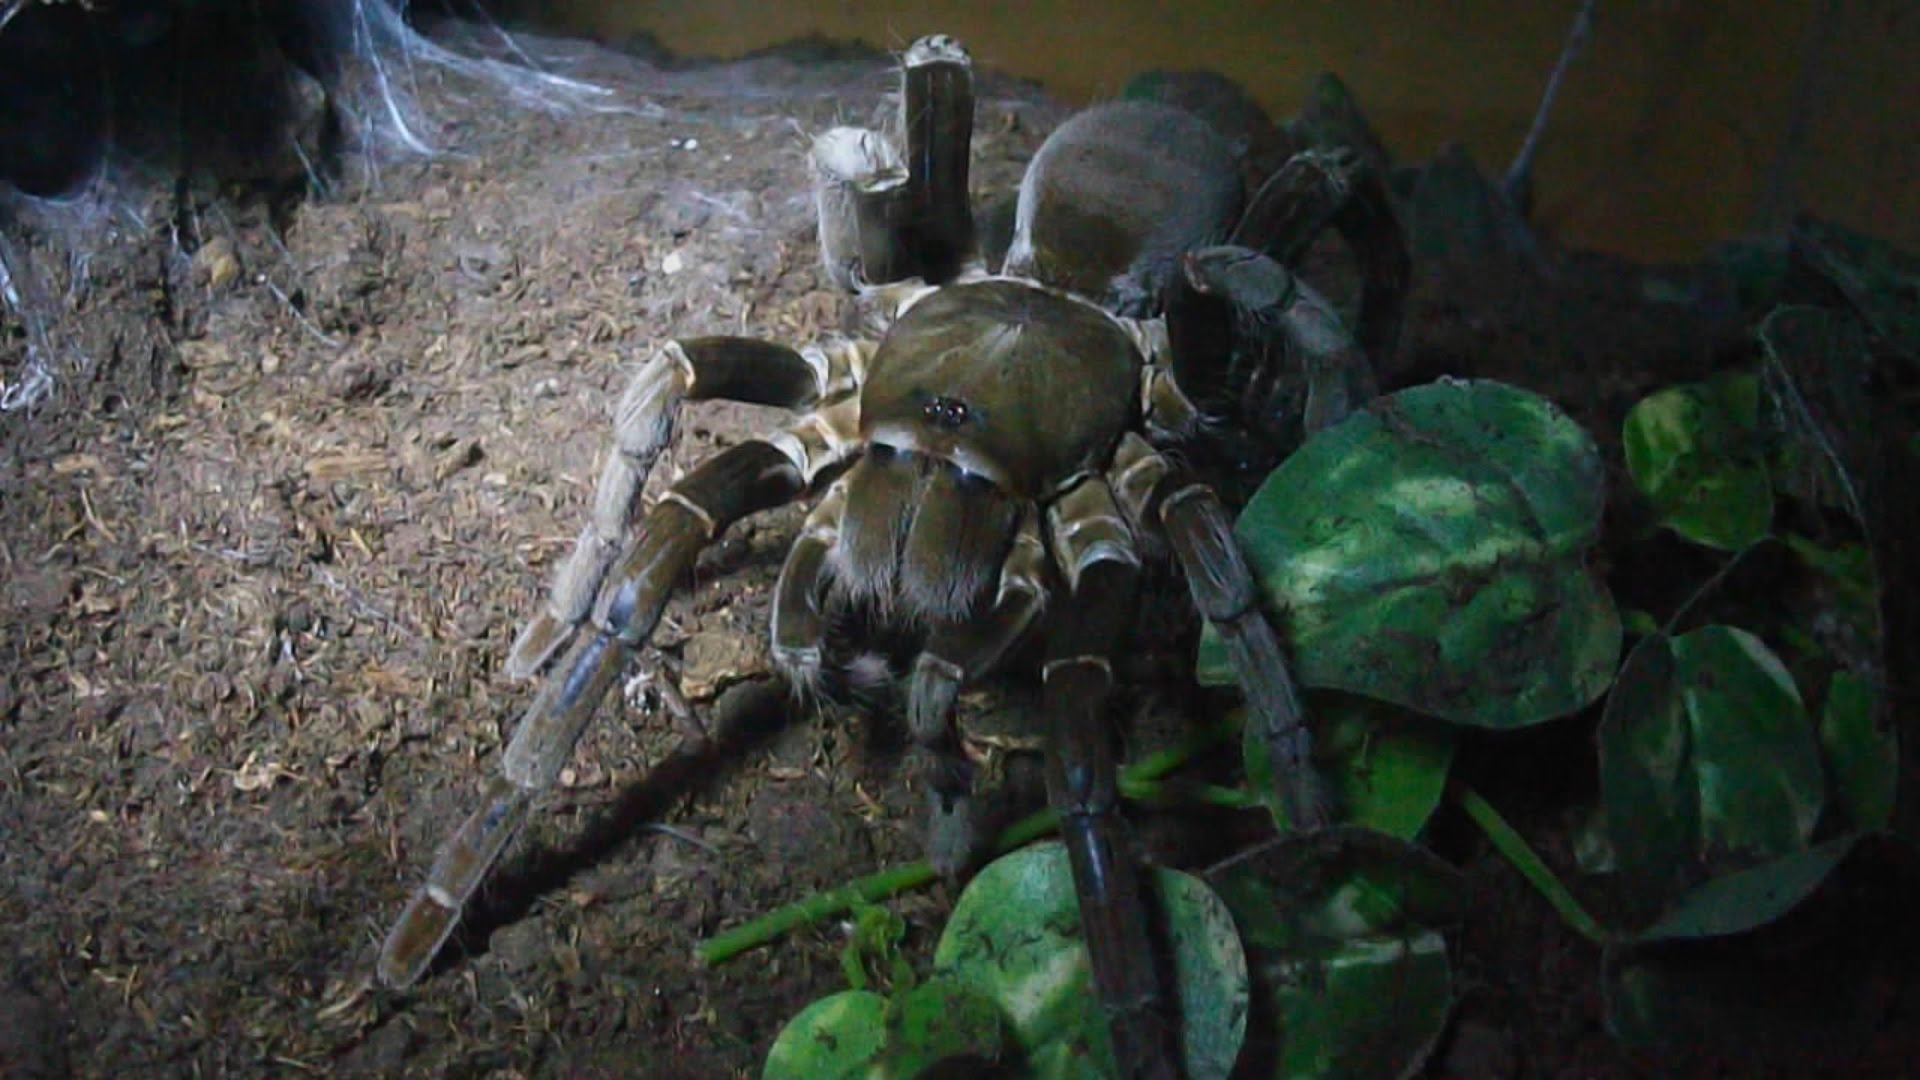 Hercules Baboon Spider Arena Pile Top 10 Worlds Largest Spider